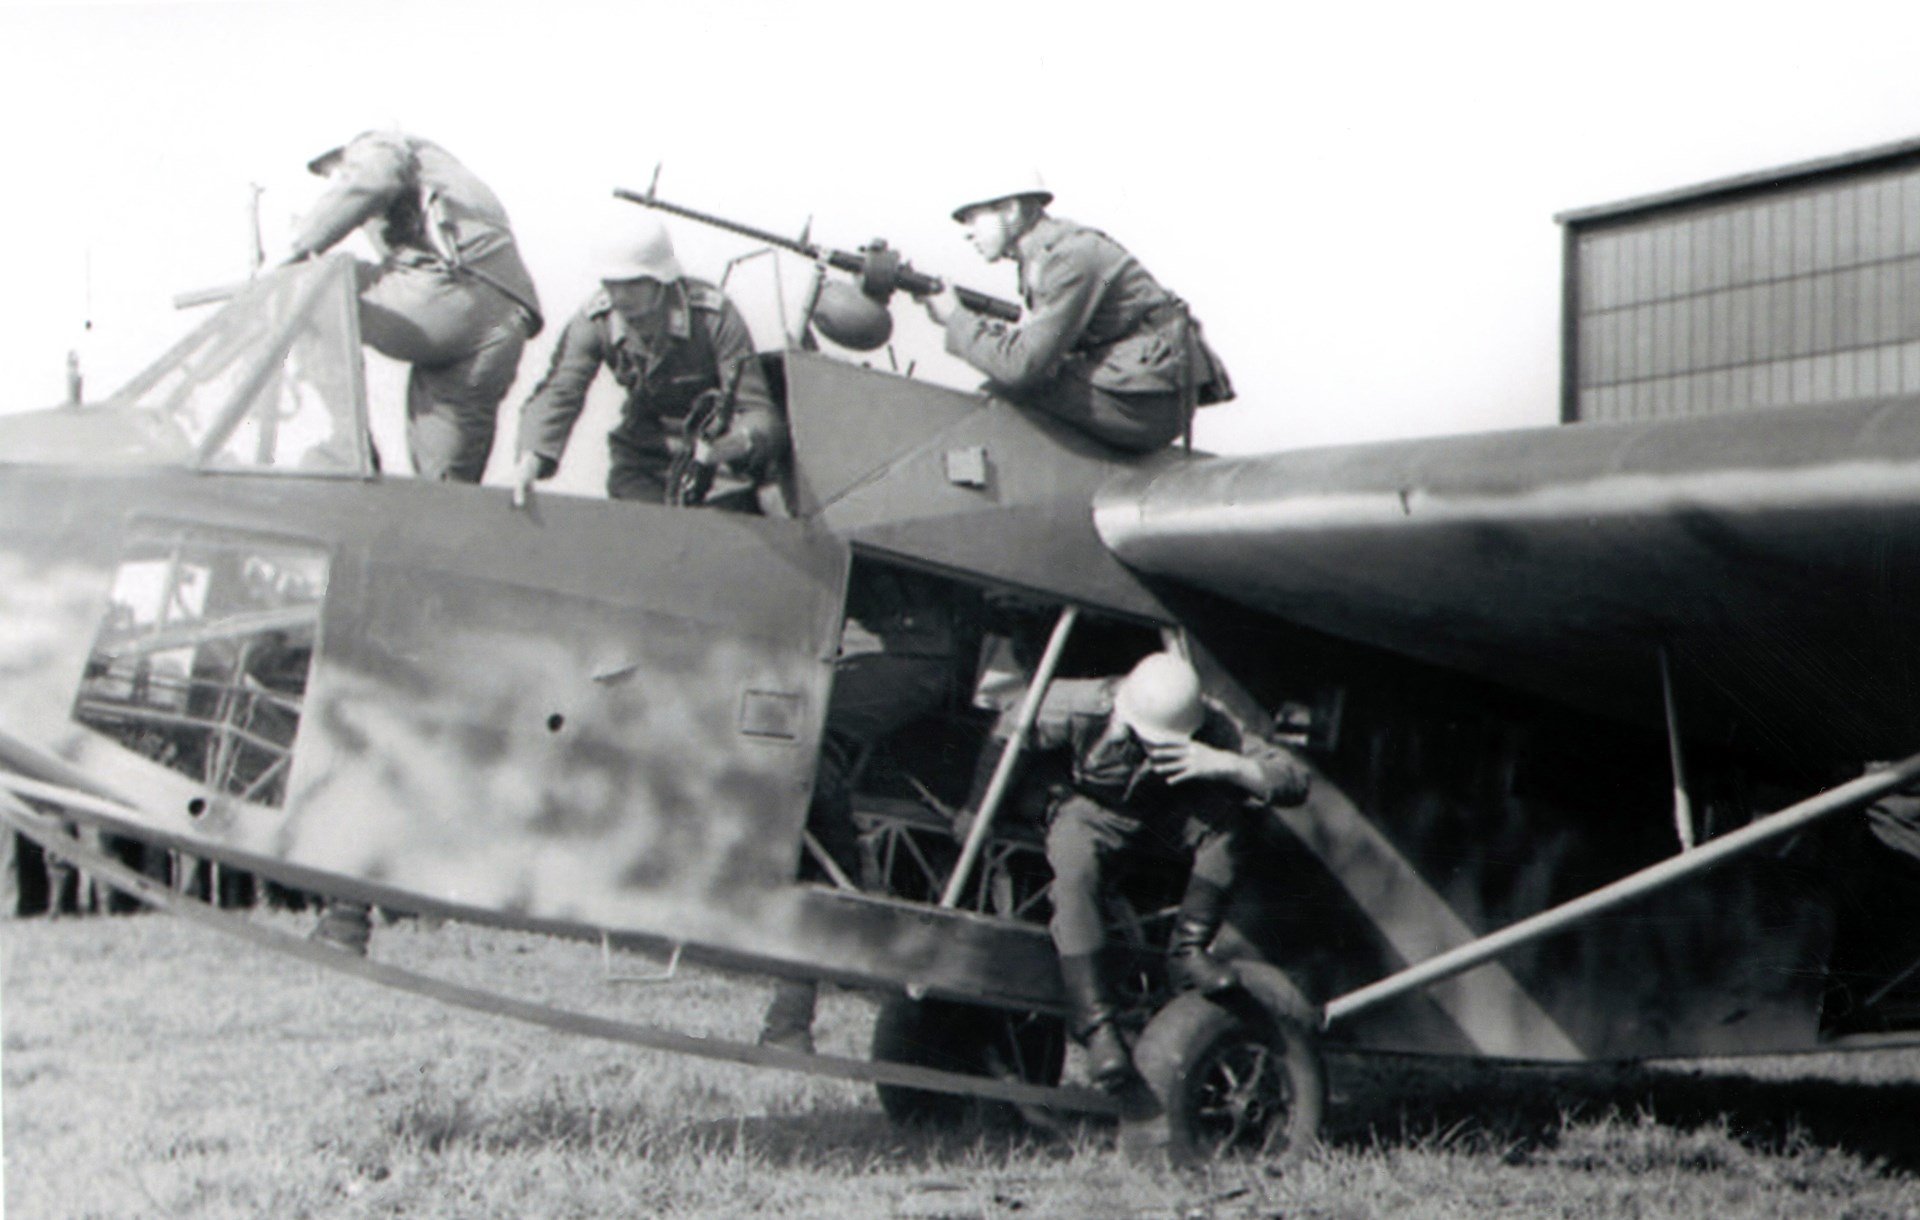 The DFS 230 glider: The wheels seen in this image would normally be dropped once the glider was airborne, with combat landings made on the skid. Exit from the slim aircraft was through the knock-out side panels and from the cockpit. Author’s collection